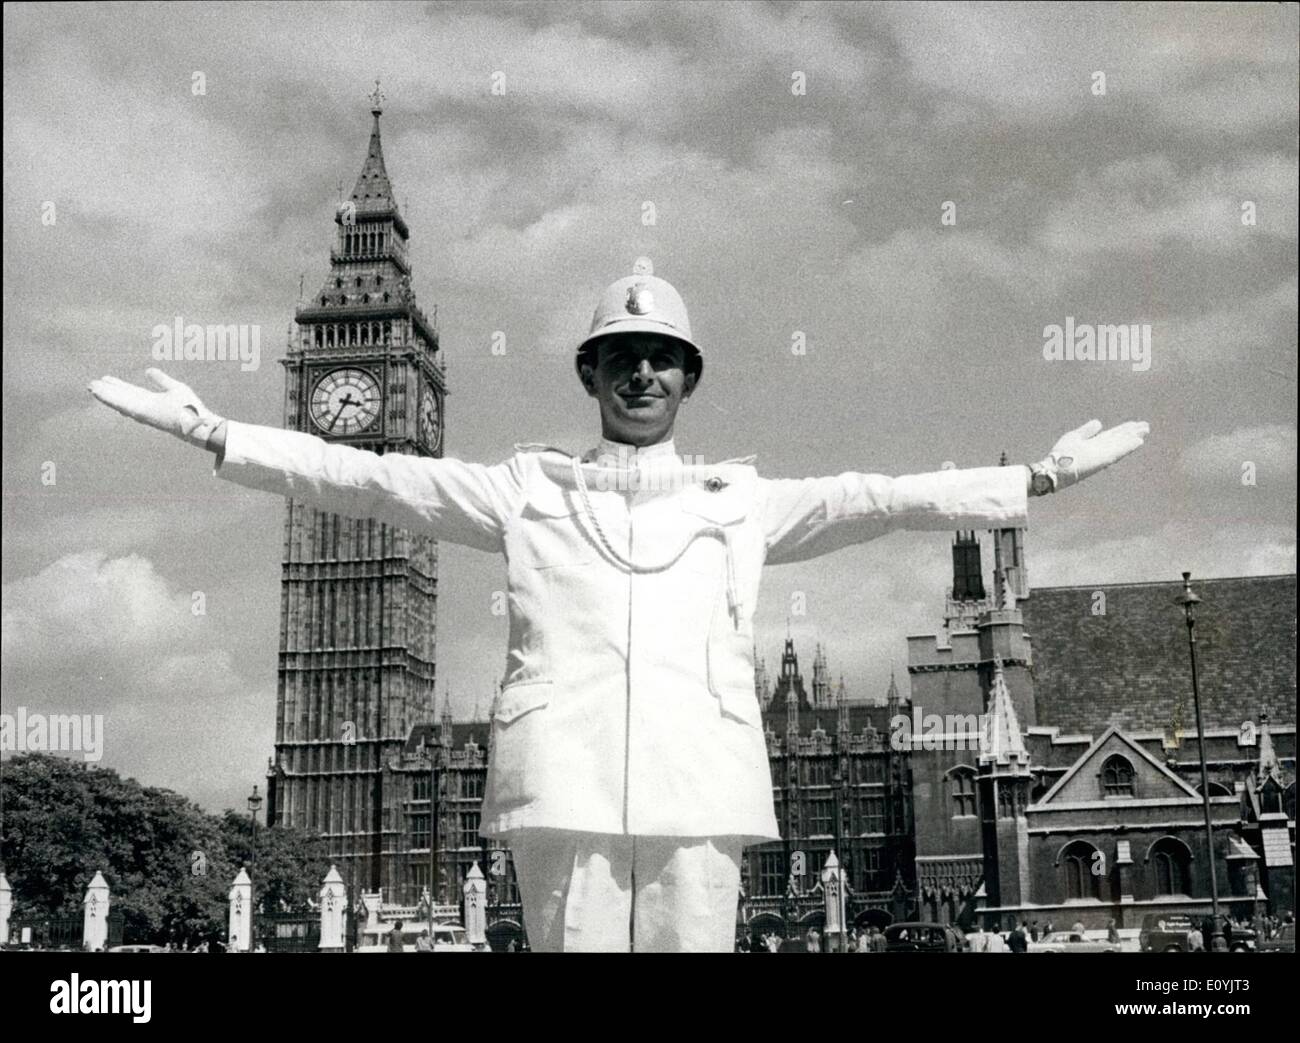 Jul. 22, 1970 - July 22nd, 1970 Yugoslavian Dancing Policeman in London. As part of the British European Airways Fly East programme, a Yugoslavian policeman is on a courtesy visit to London. He is one of the leading male dancers in the Belgrade Ballet Company. Standing 6ft 6in in his dress uniform (complete with pith helmet) he today realized an ambition to direct London's traffic in ballet style. He is 34-year old Jovan Bulj, from Belgrade, and while on point duty back home, he amuses motorists and pedestrians with his ballet movements Stock Photo